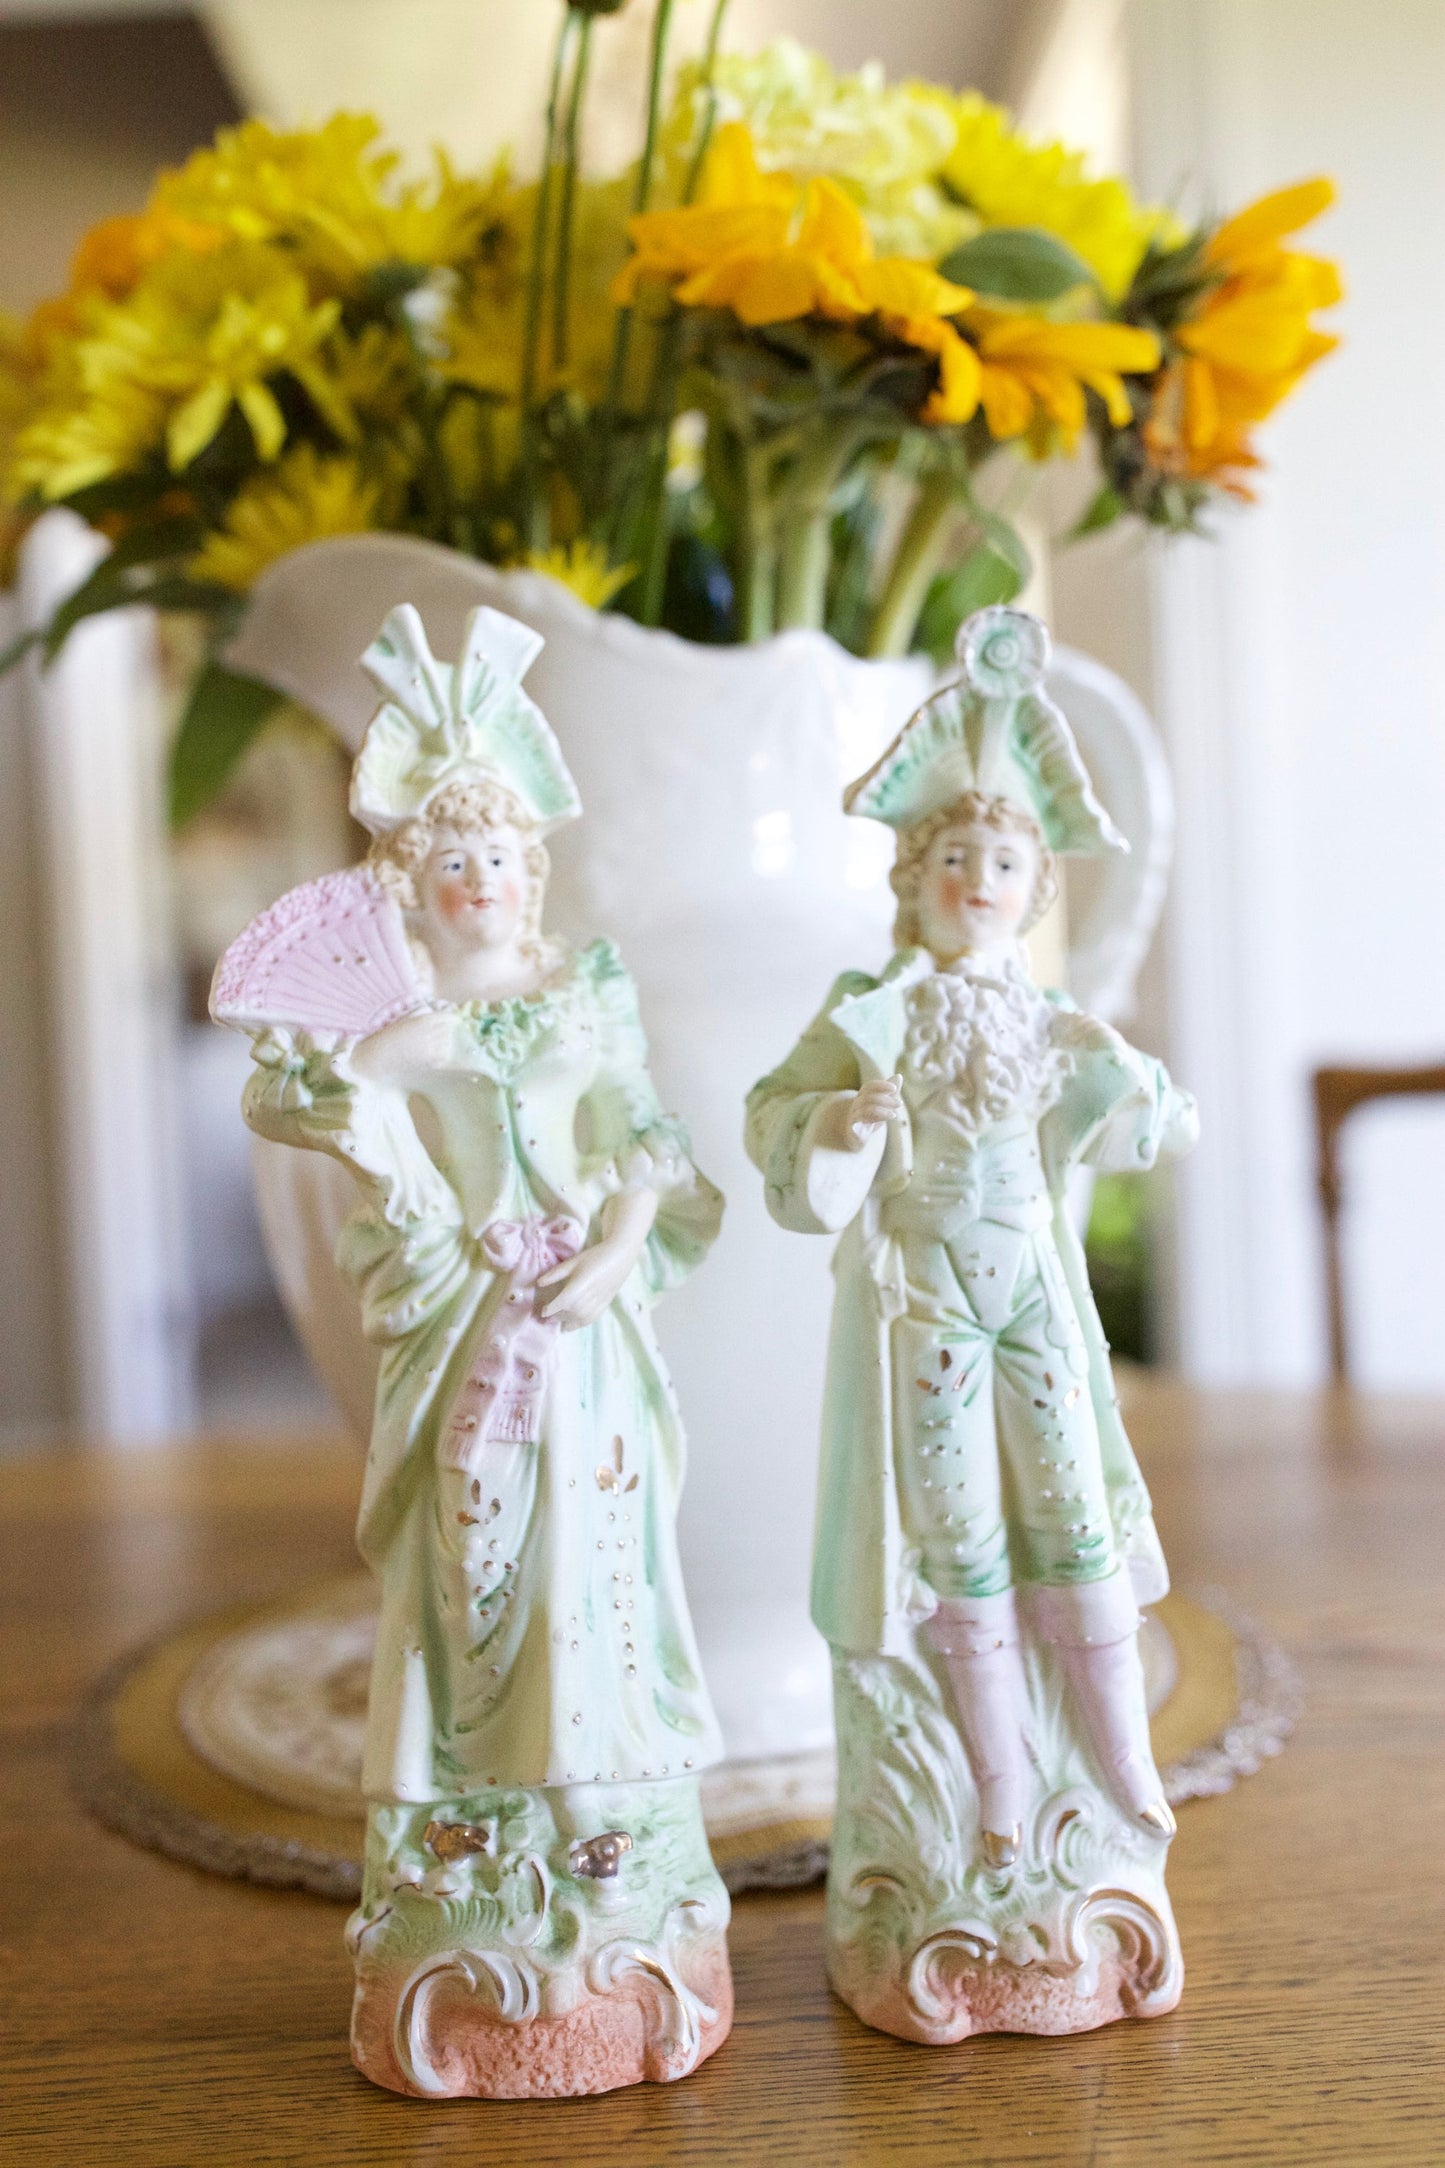 Painted Bisque Figurines- Pair of Bisque Figures- Green,Peach